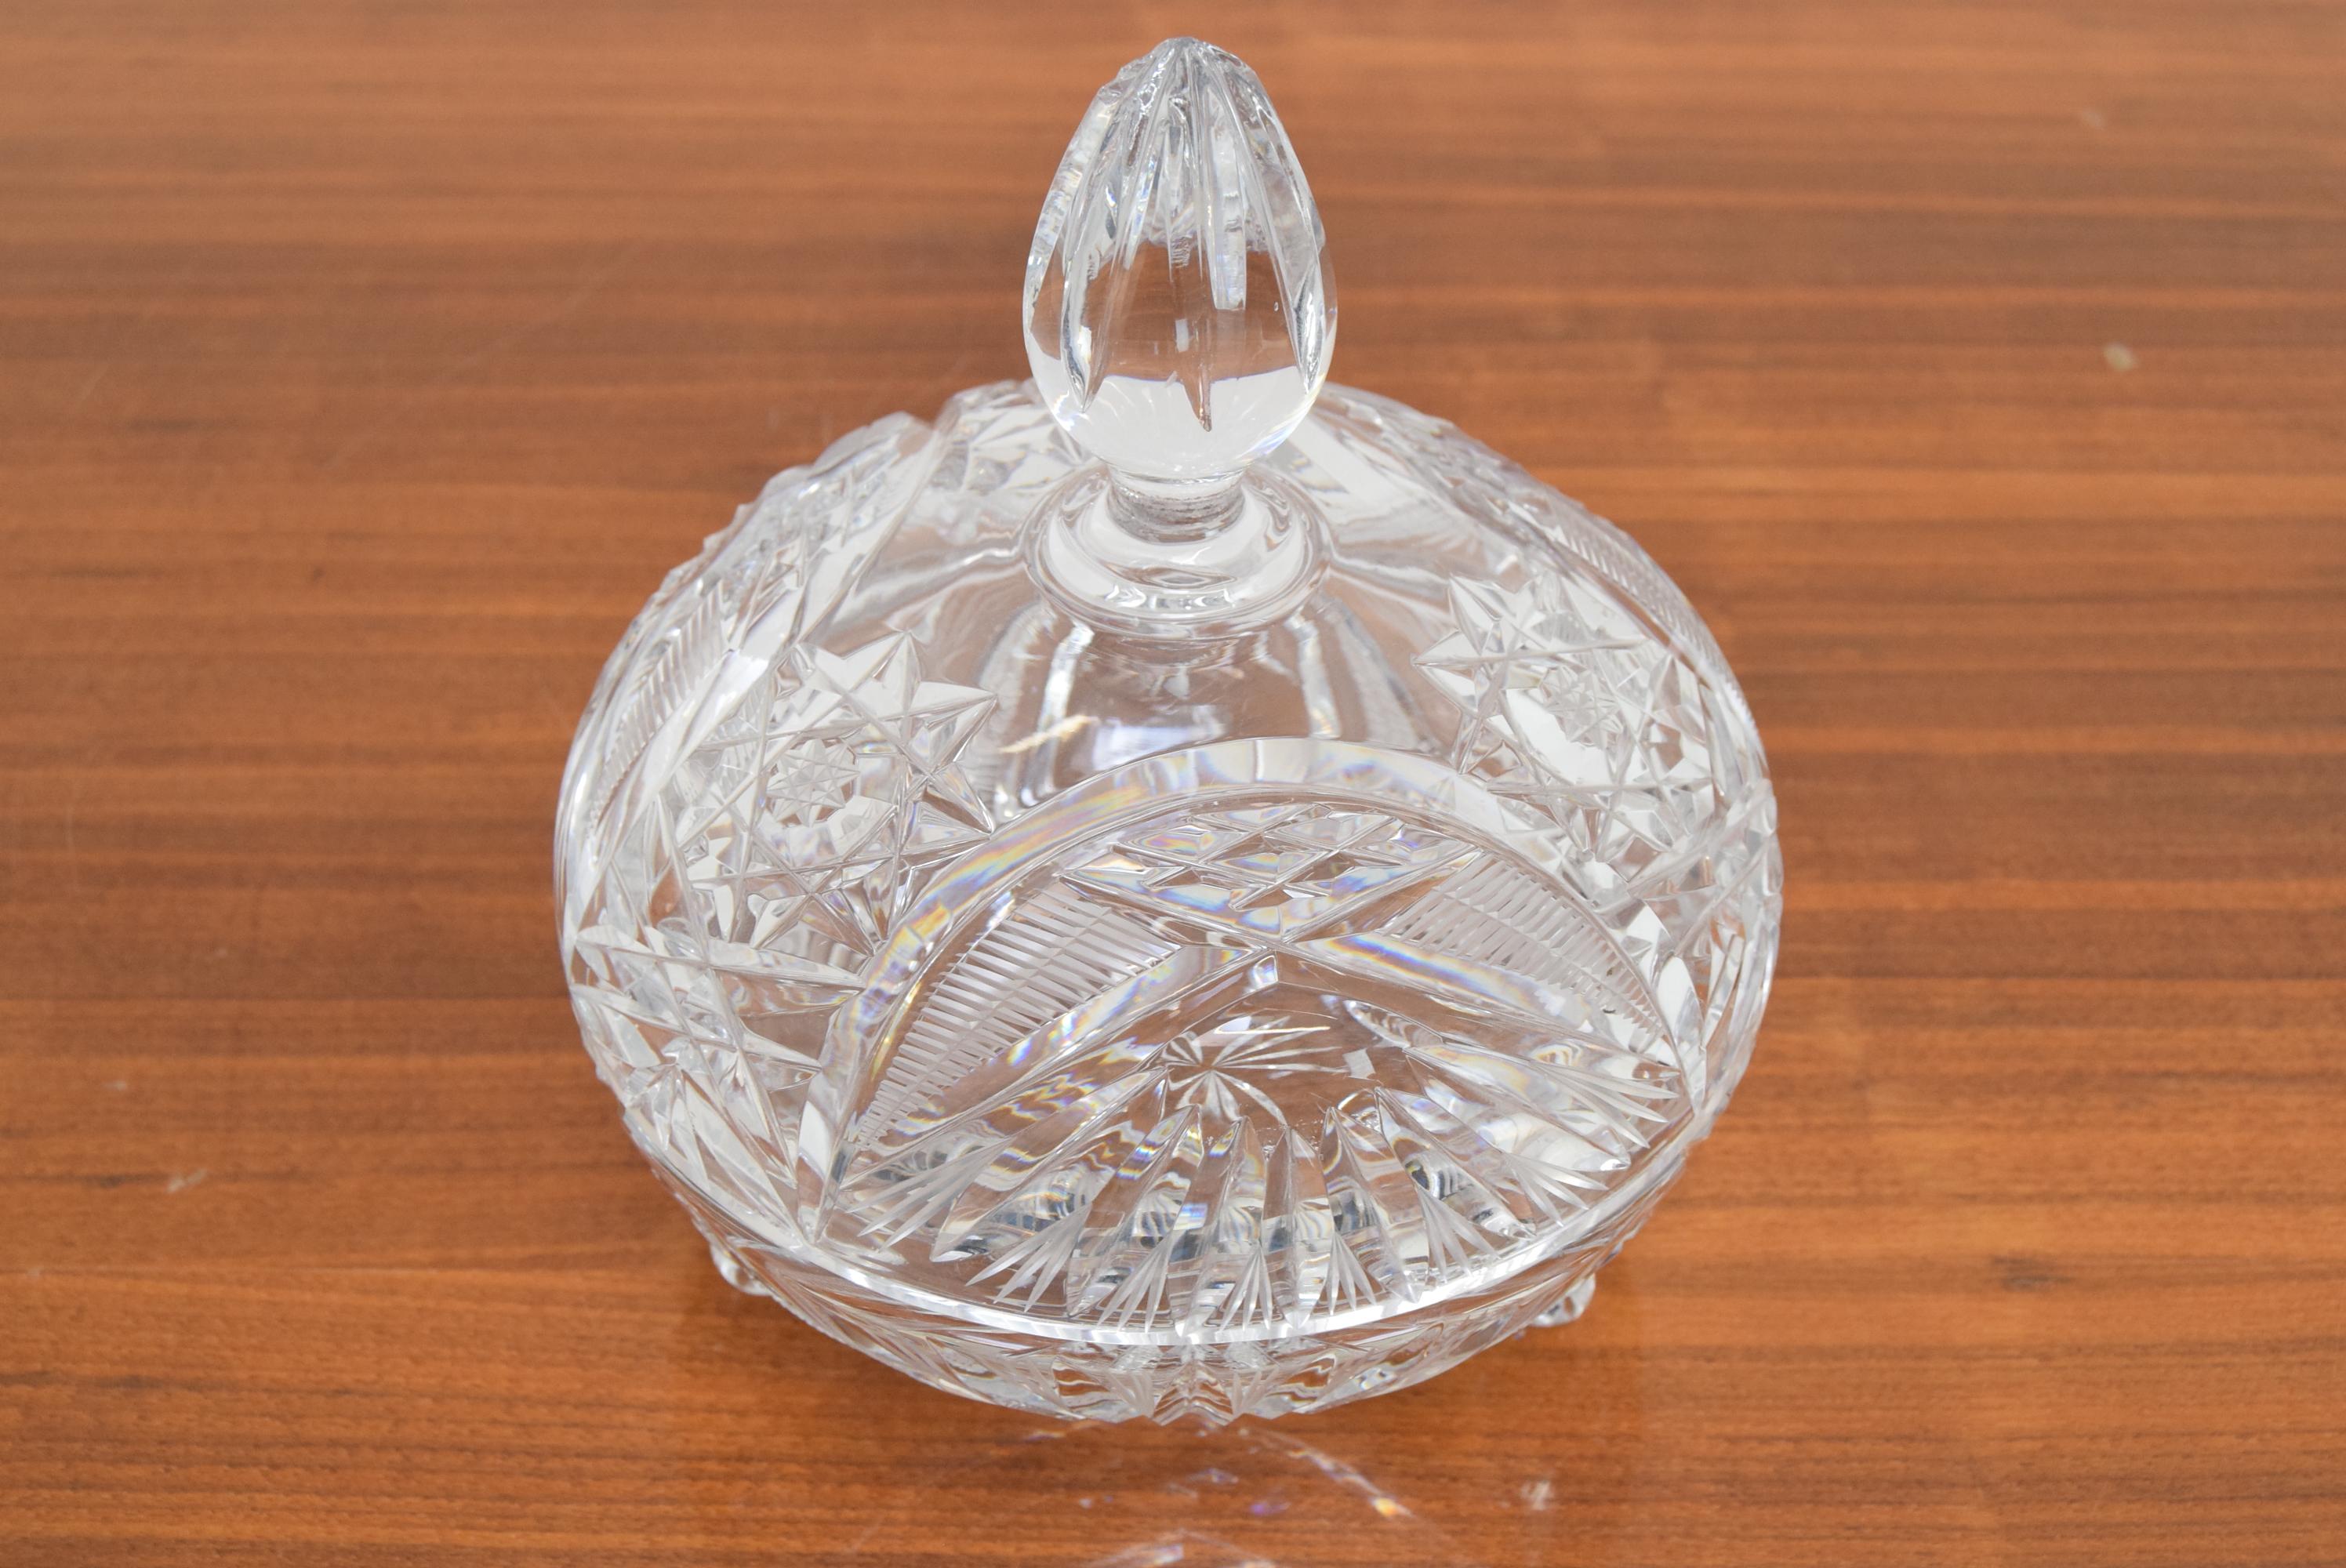 
Made in Czechoslovakia
Made of Crystal Glass,Cut Glass
The jar has small sharp splinters on the tip
Re-polished
Original condition.